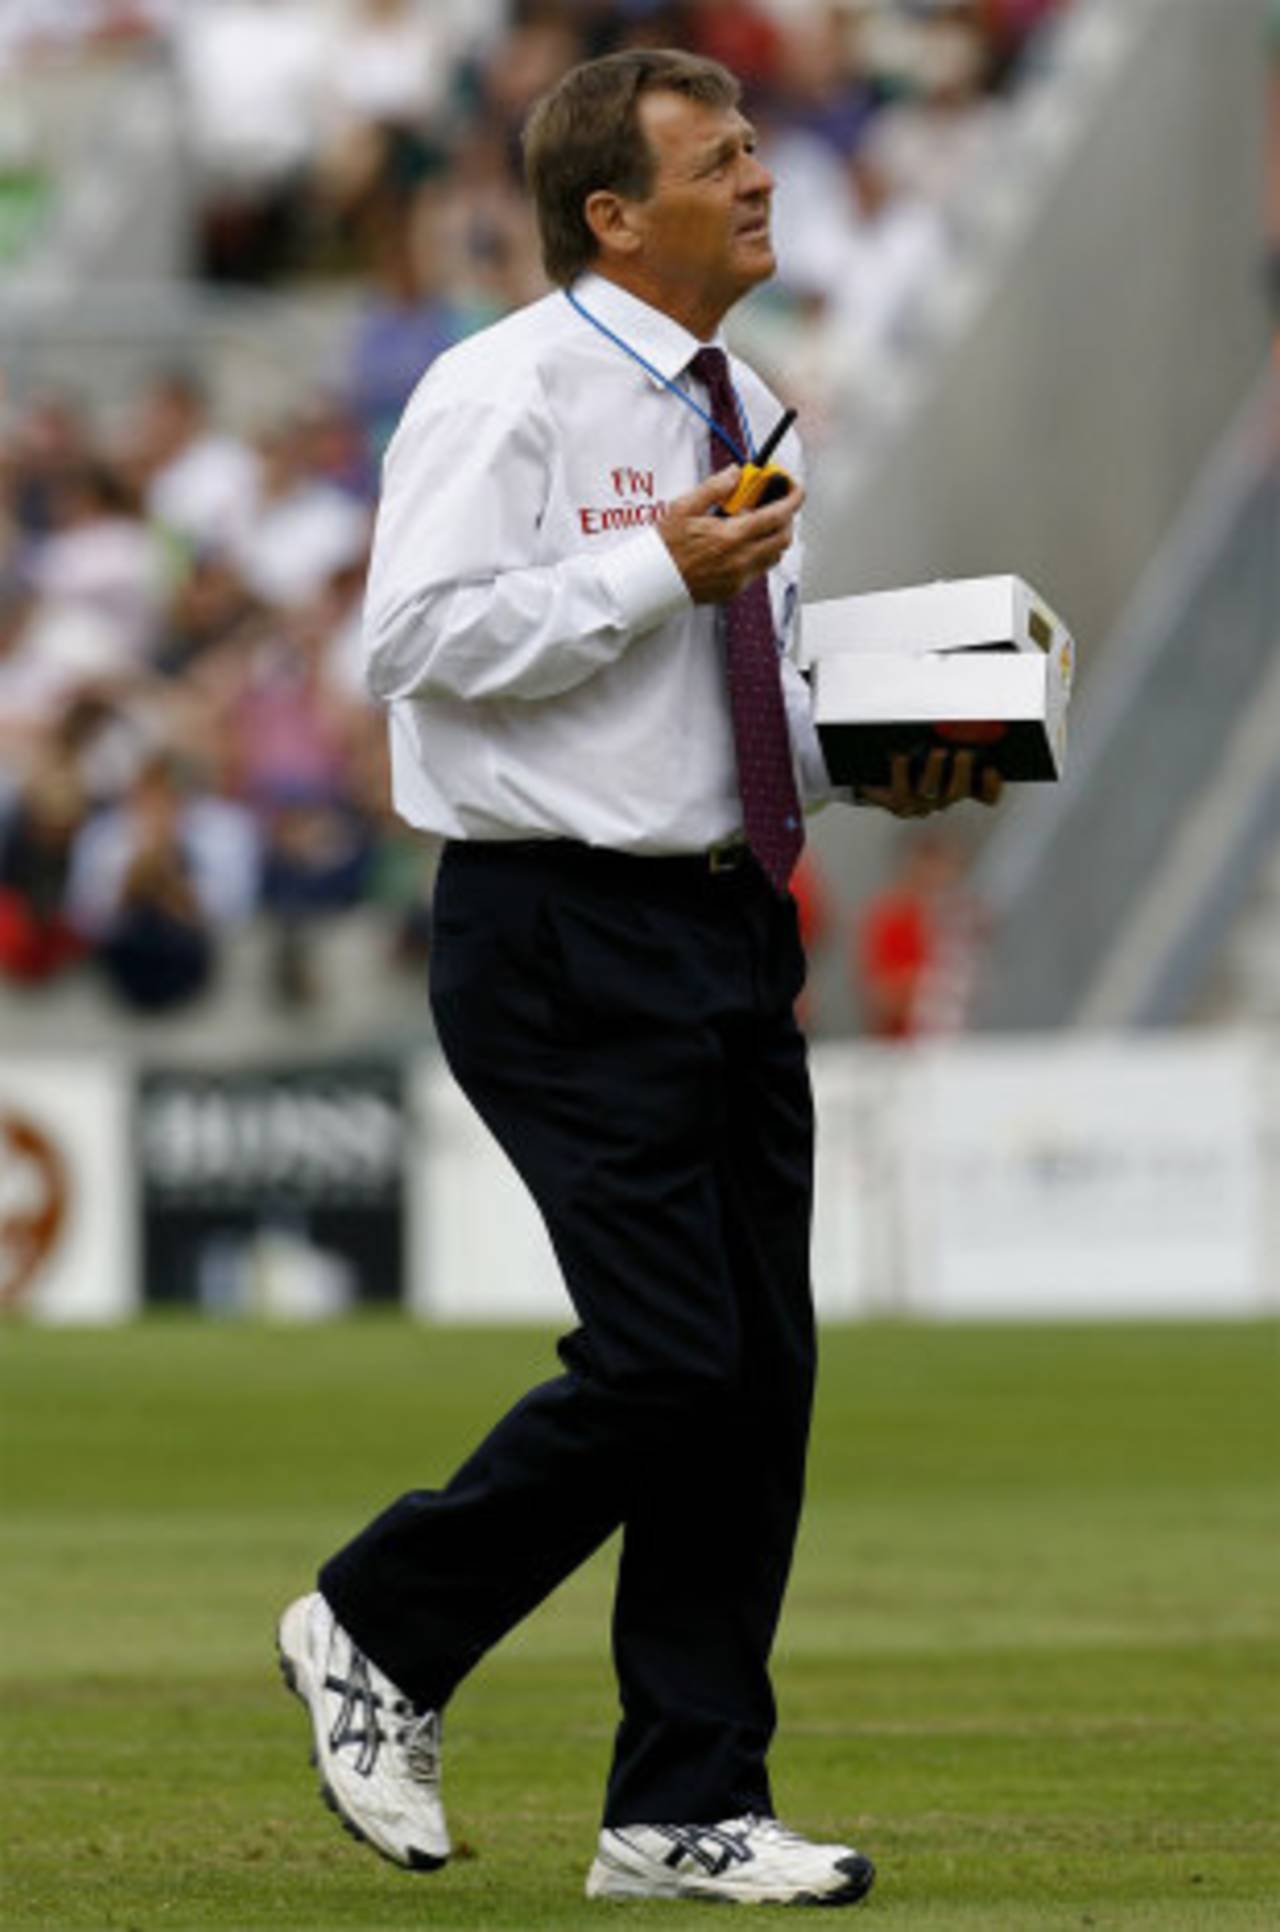 Trevor Jesty with the box of new balls after the umpires called for change, England v Pakistan, 4th Test, The Oval, August 20, 2006